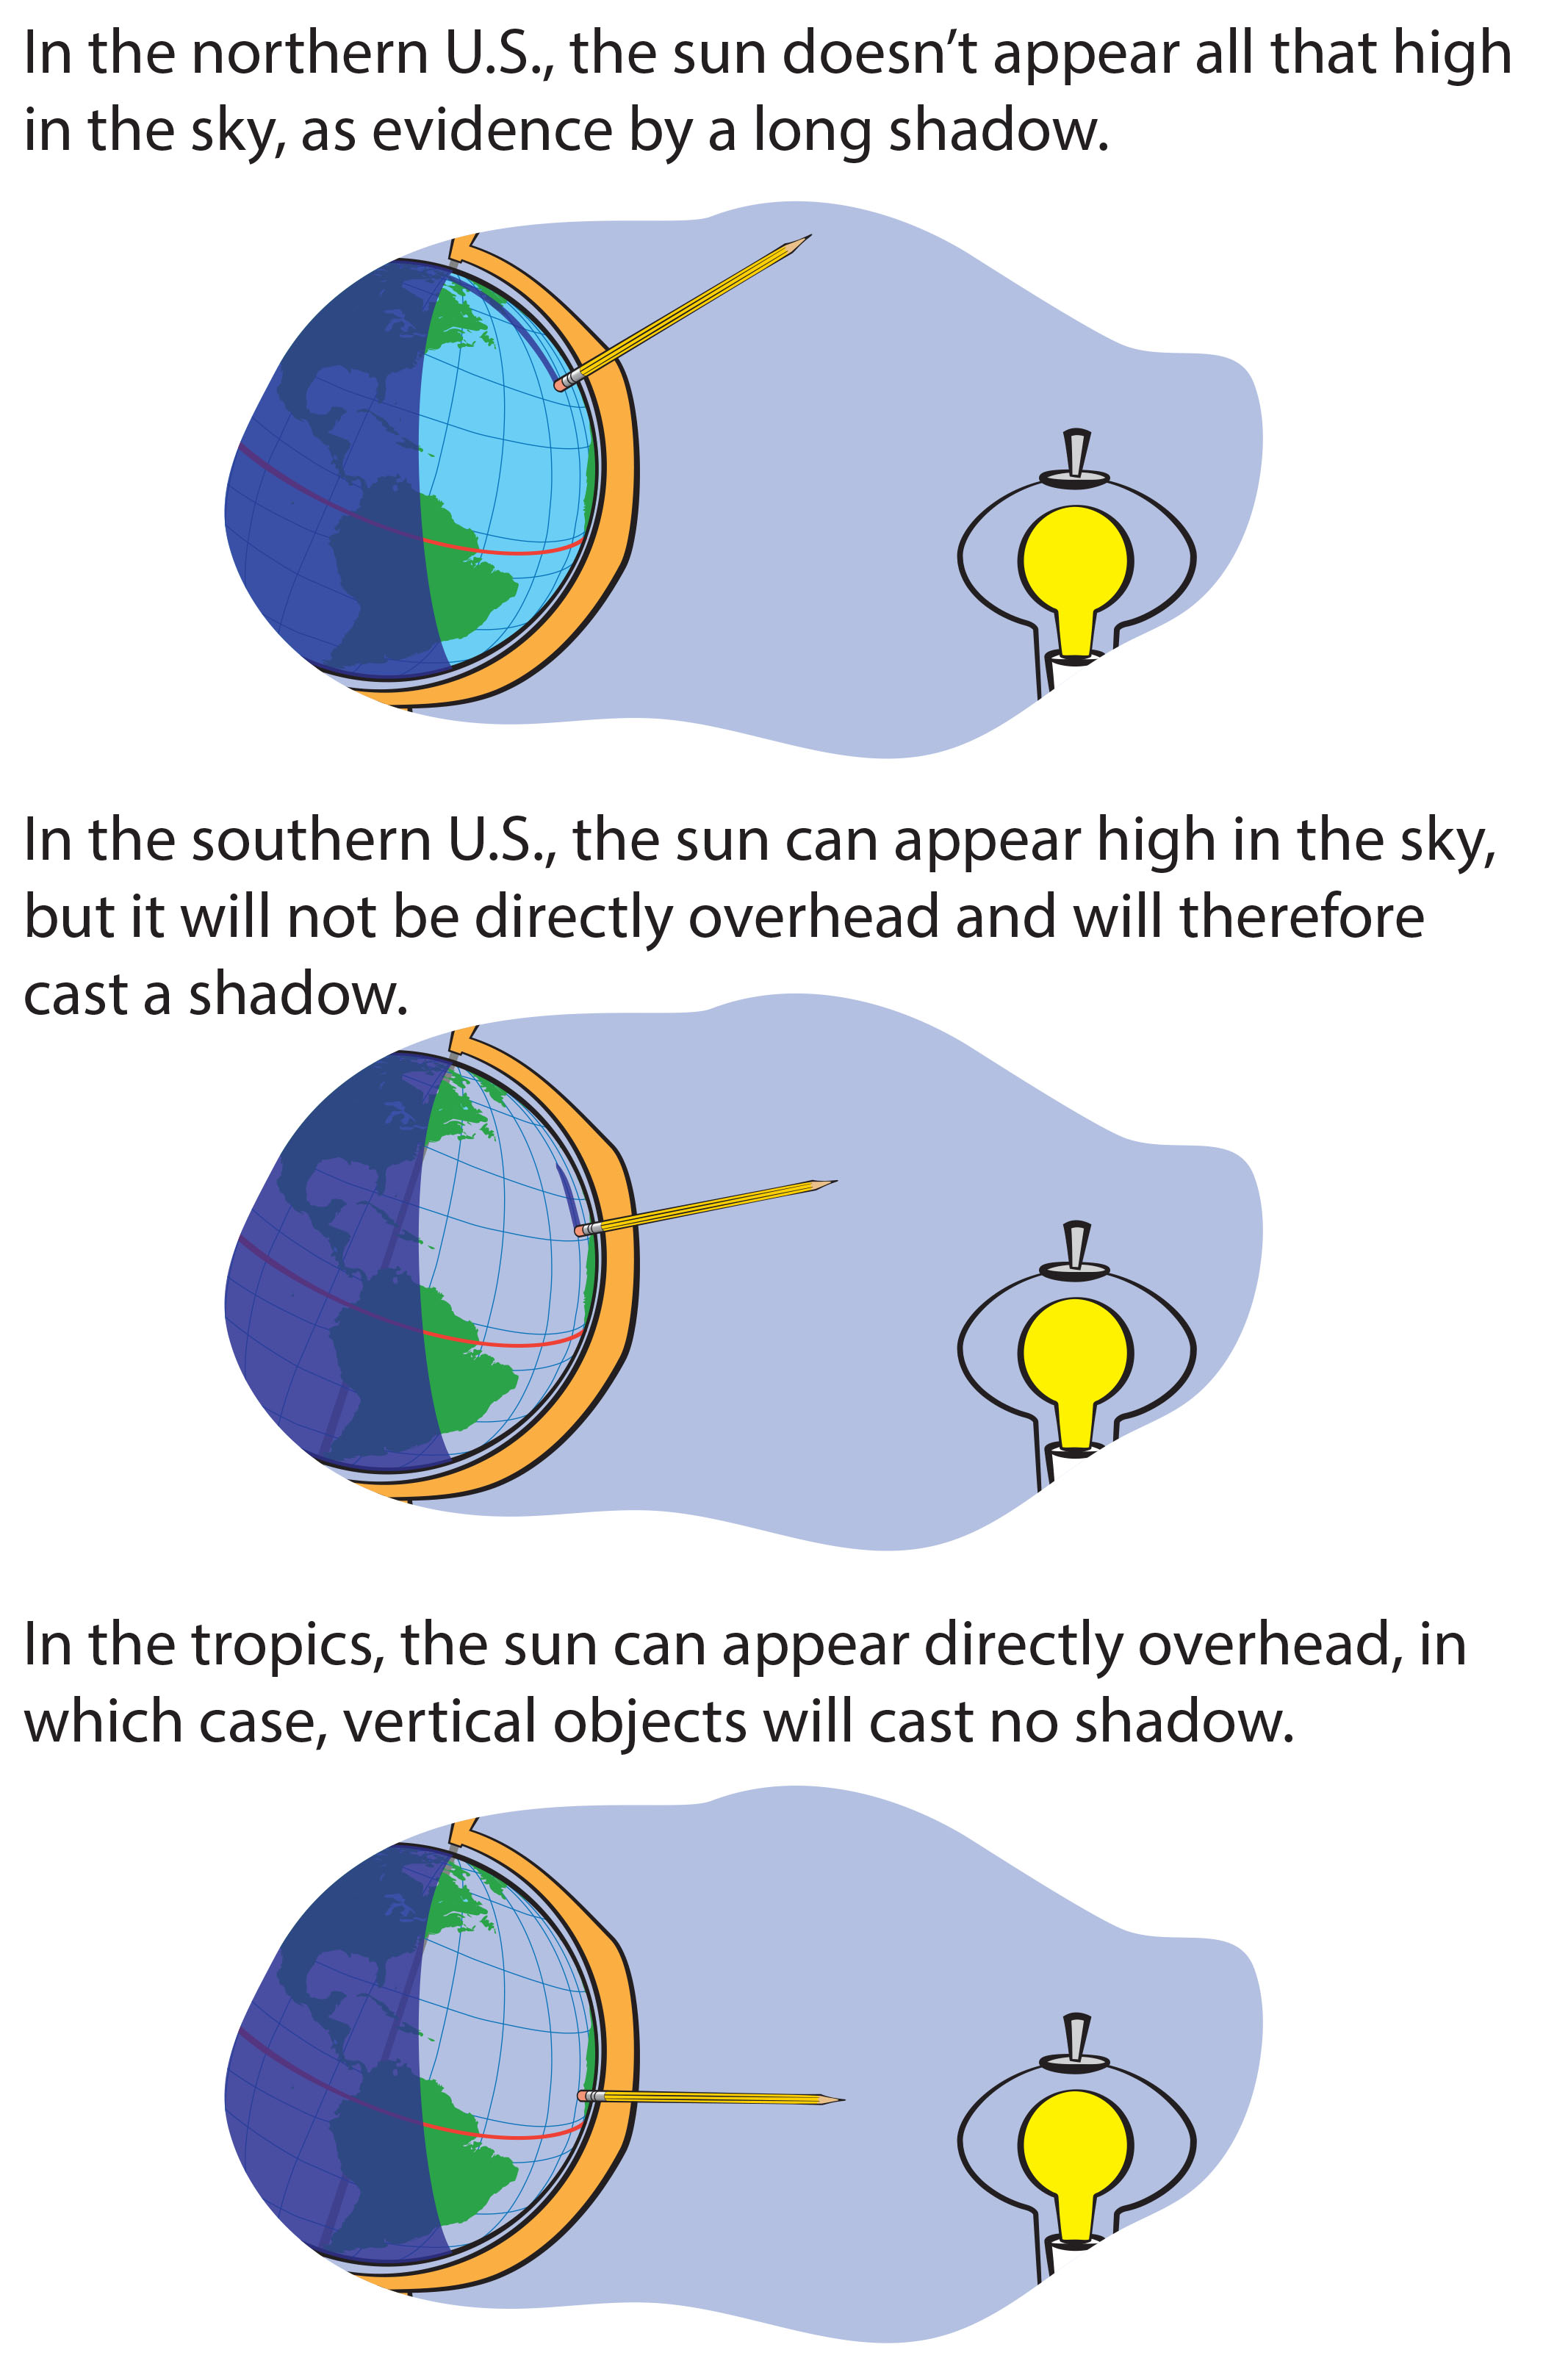 In the continental united States. (or any places at similar latitures), the Sun never appears "straight up."